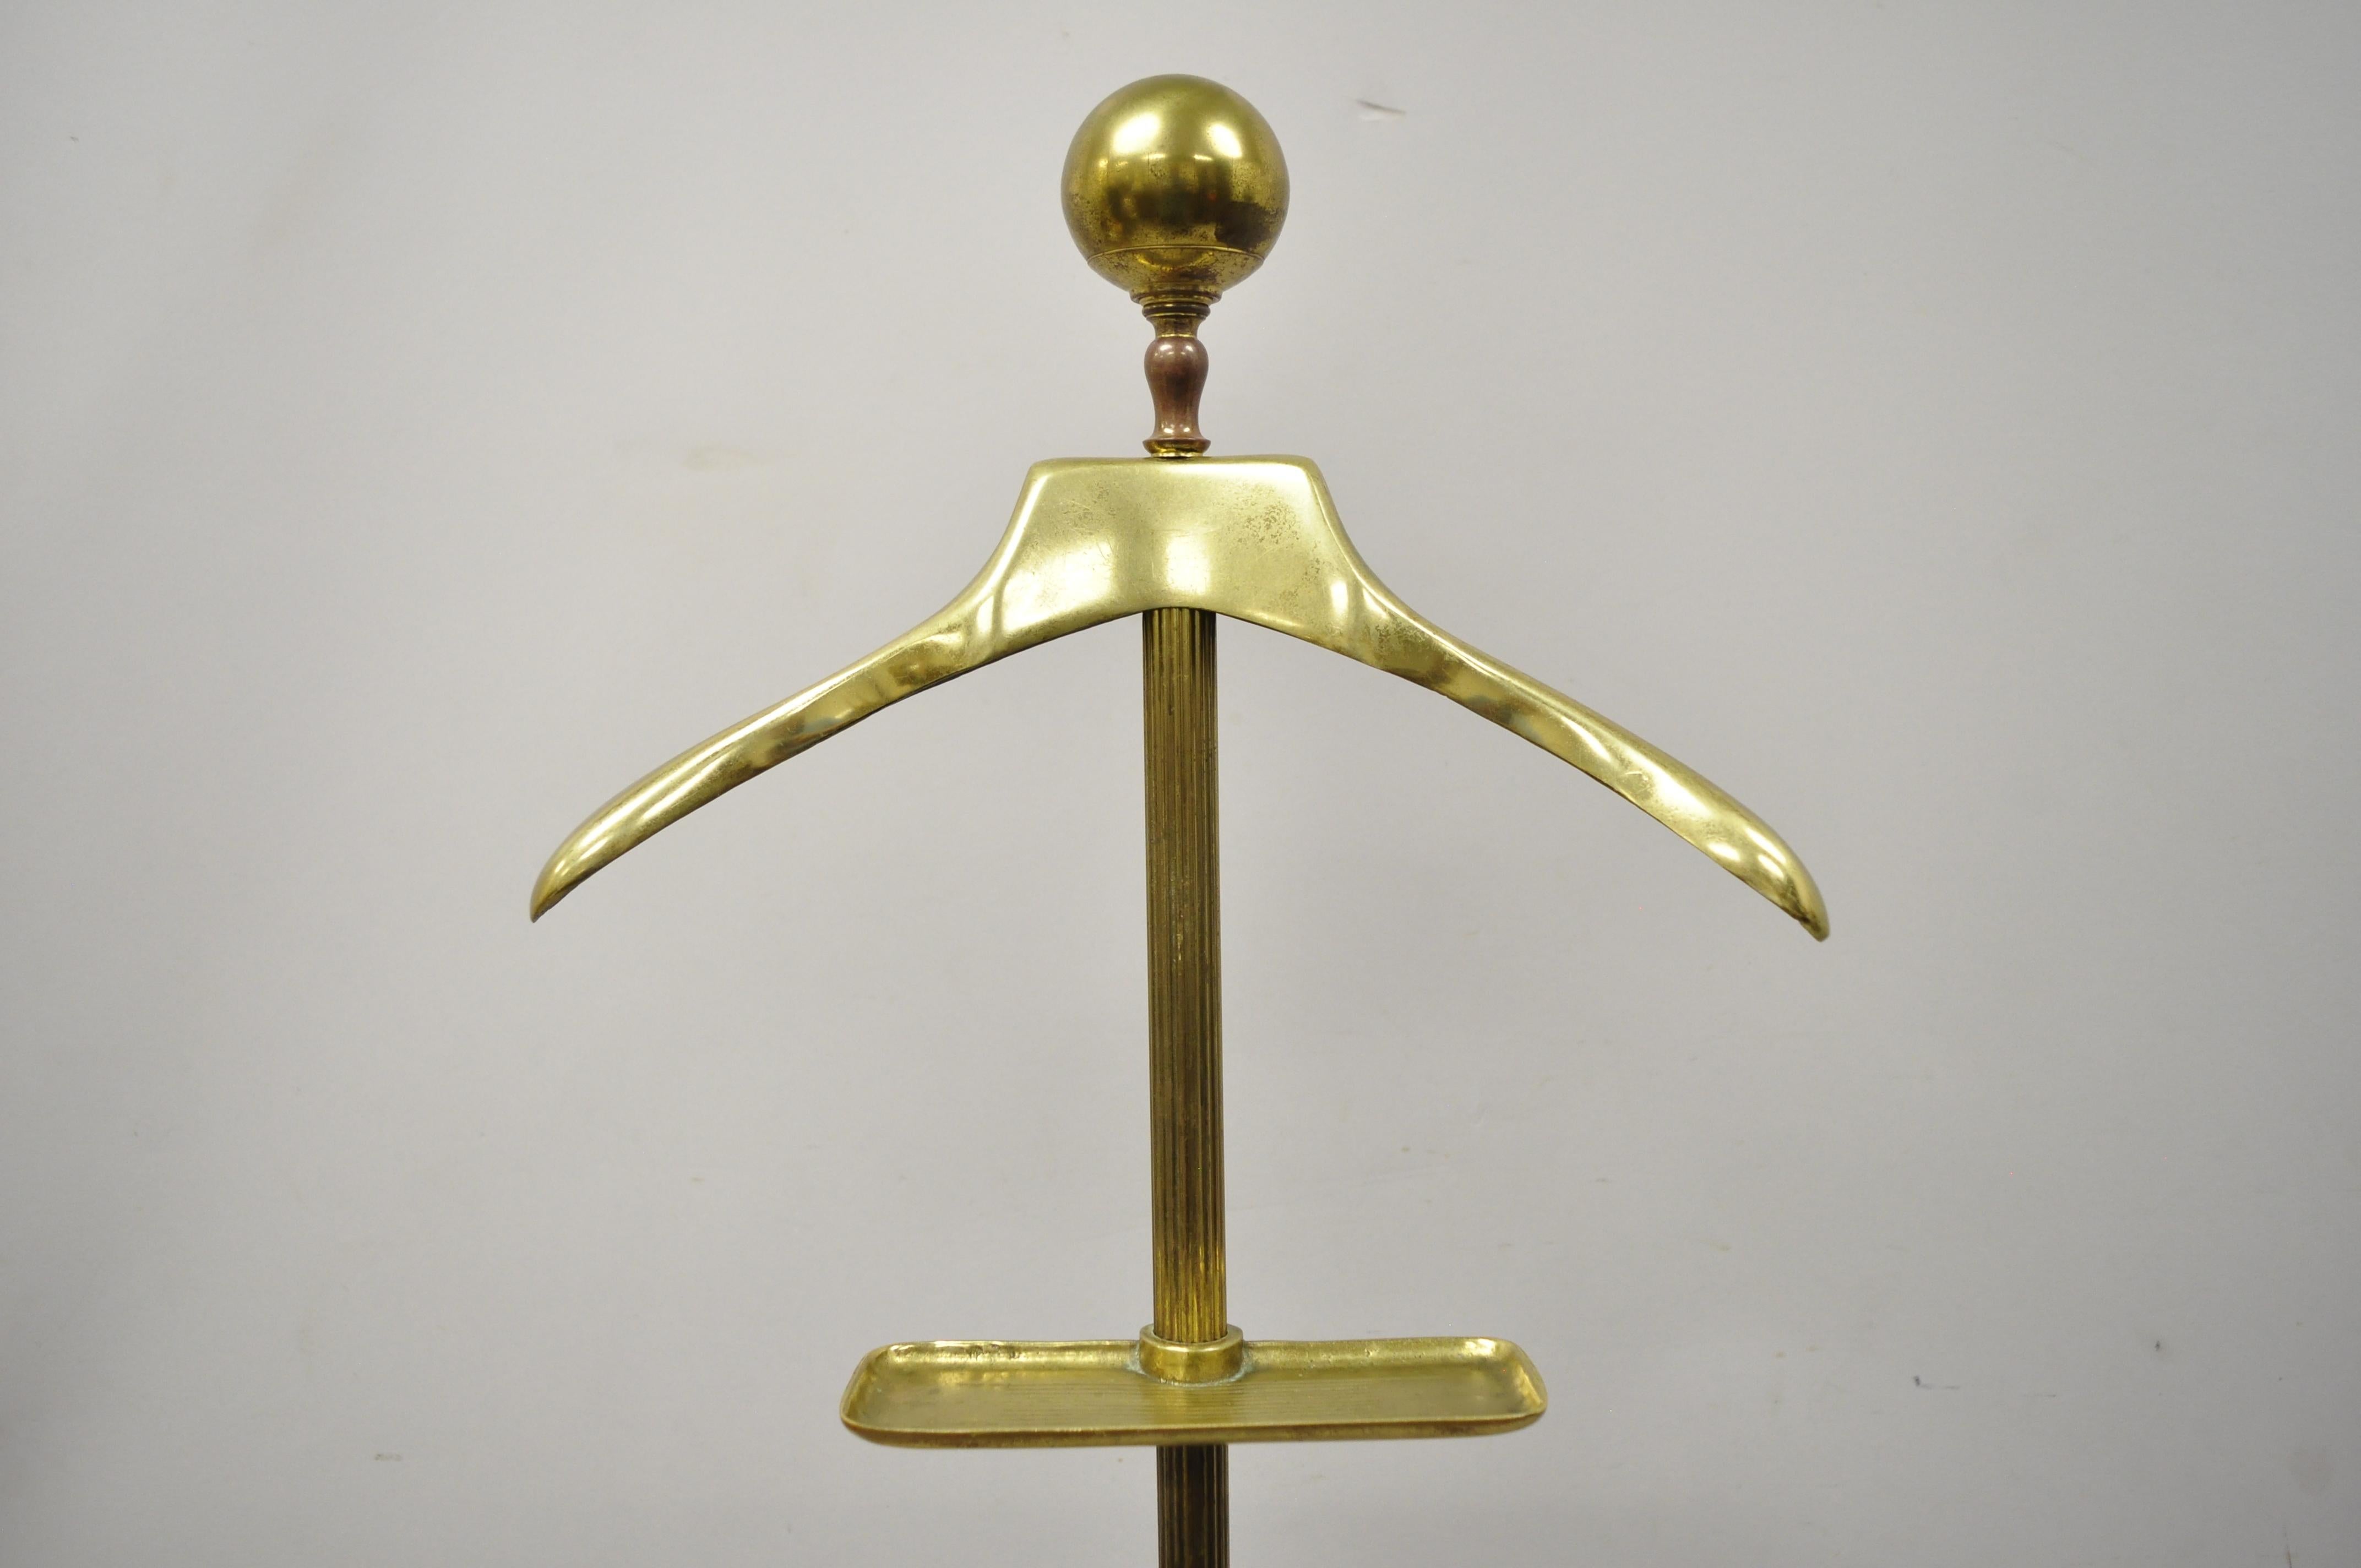 Vintage Glo-Mar brass cannonball Art Deco Gentlemans suit clothing valet stand. Item features adjustable dish and adjustable pants hanger, attractive patina to brass, cannonball finial, original label, quality American craftsmanship, great style and